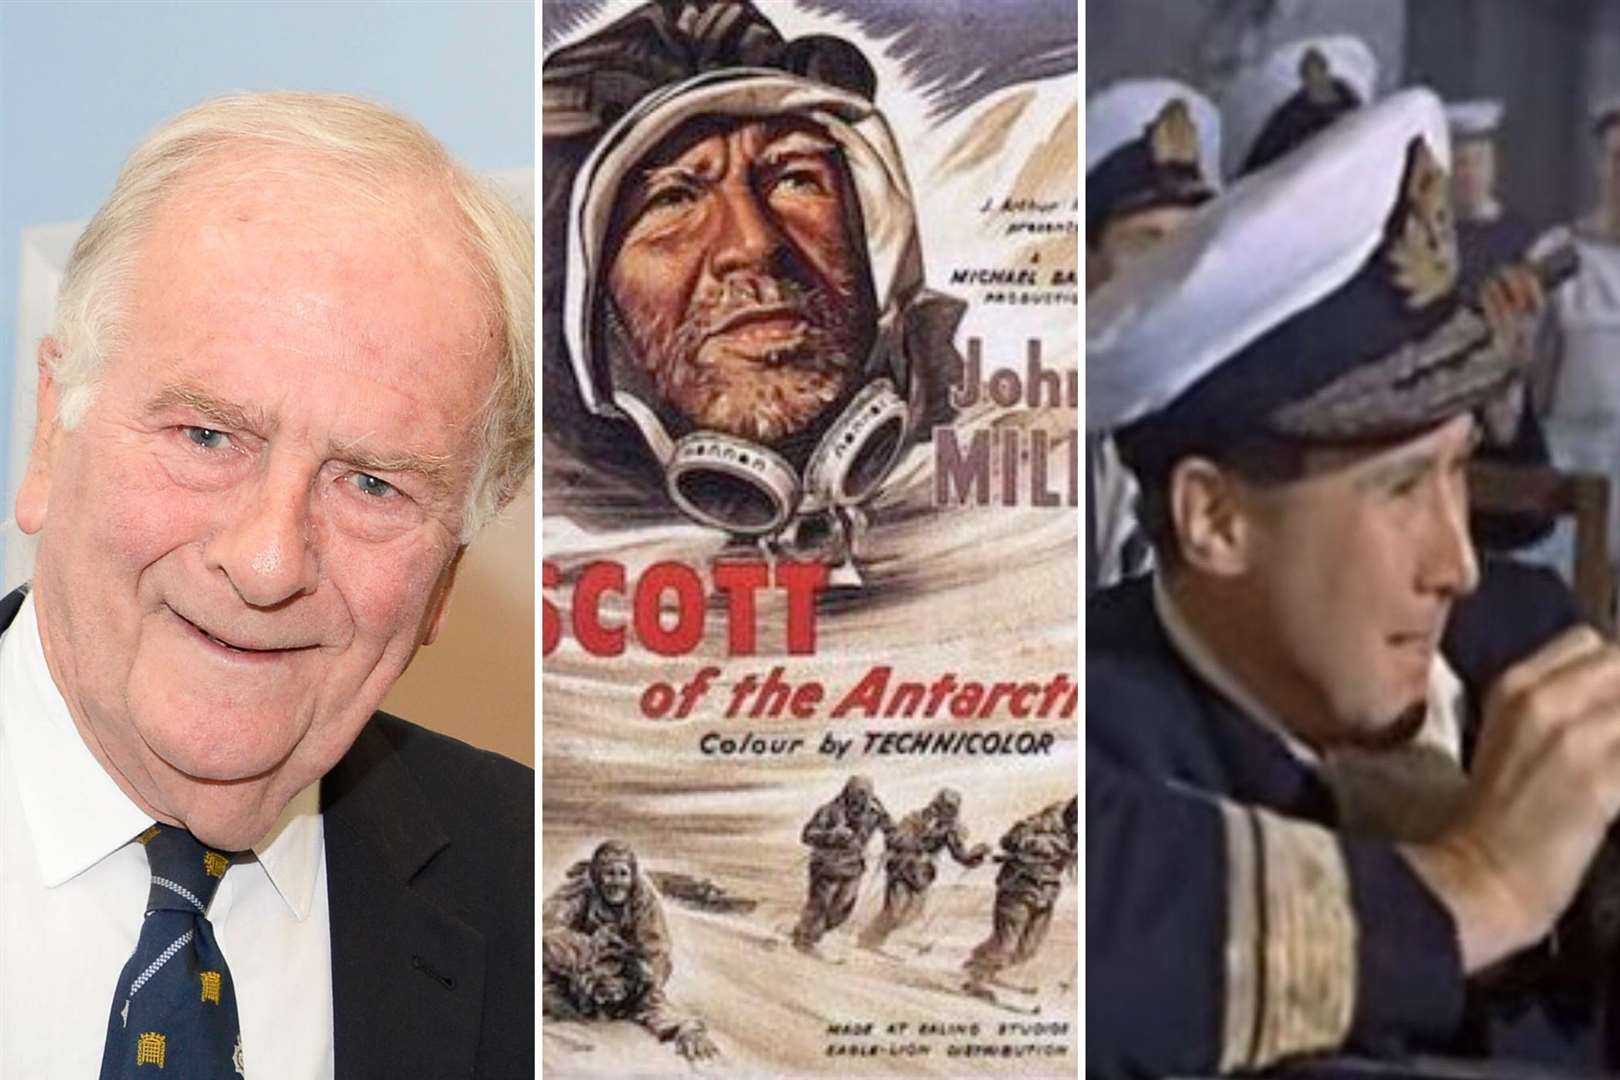 North Thanet MP Roger Gale loves both Scott of the Antarctic (1948) and The Battle of River Plate (1956) (28601544)